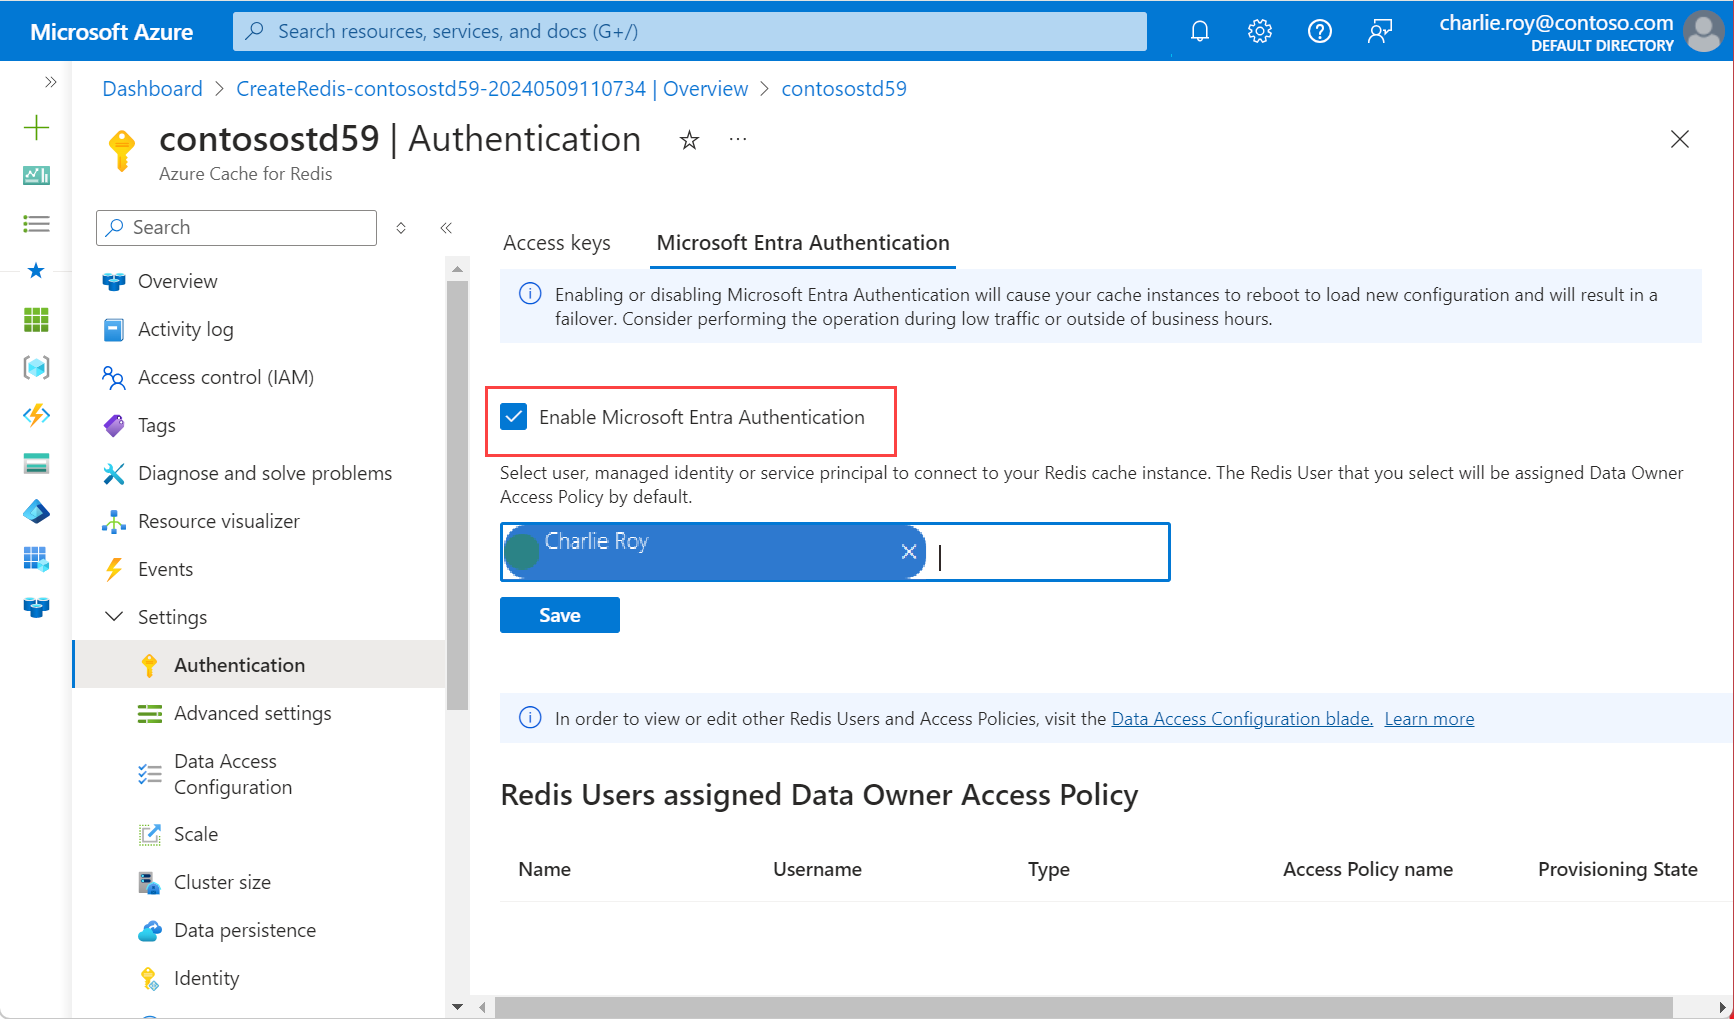 Screenshot showing authentication selected in the resource menu and the enable Microsoft Entra authentication checked.